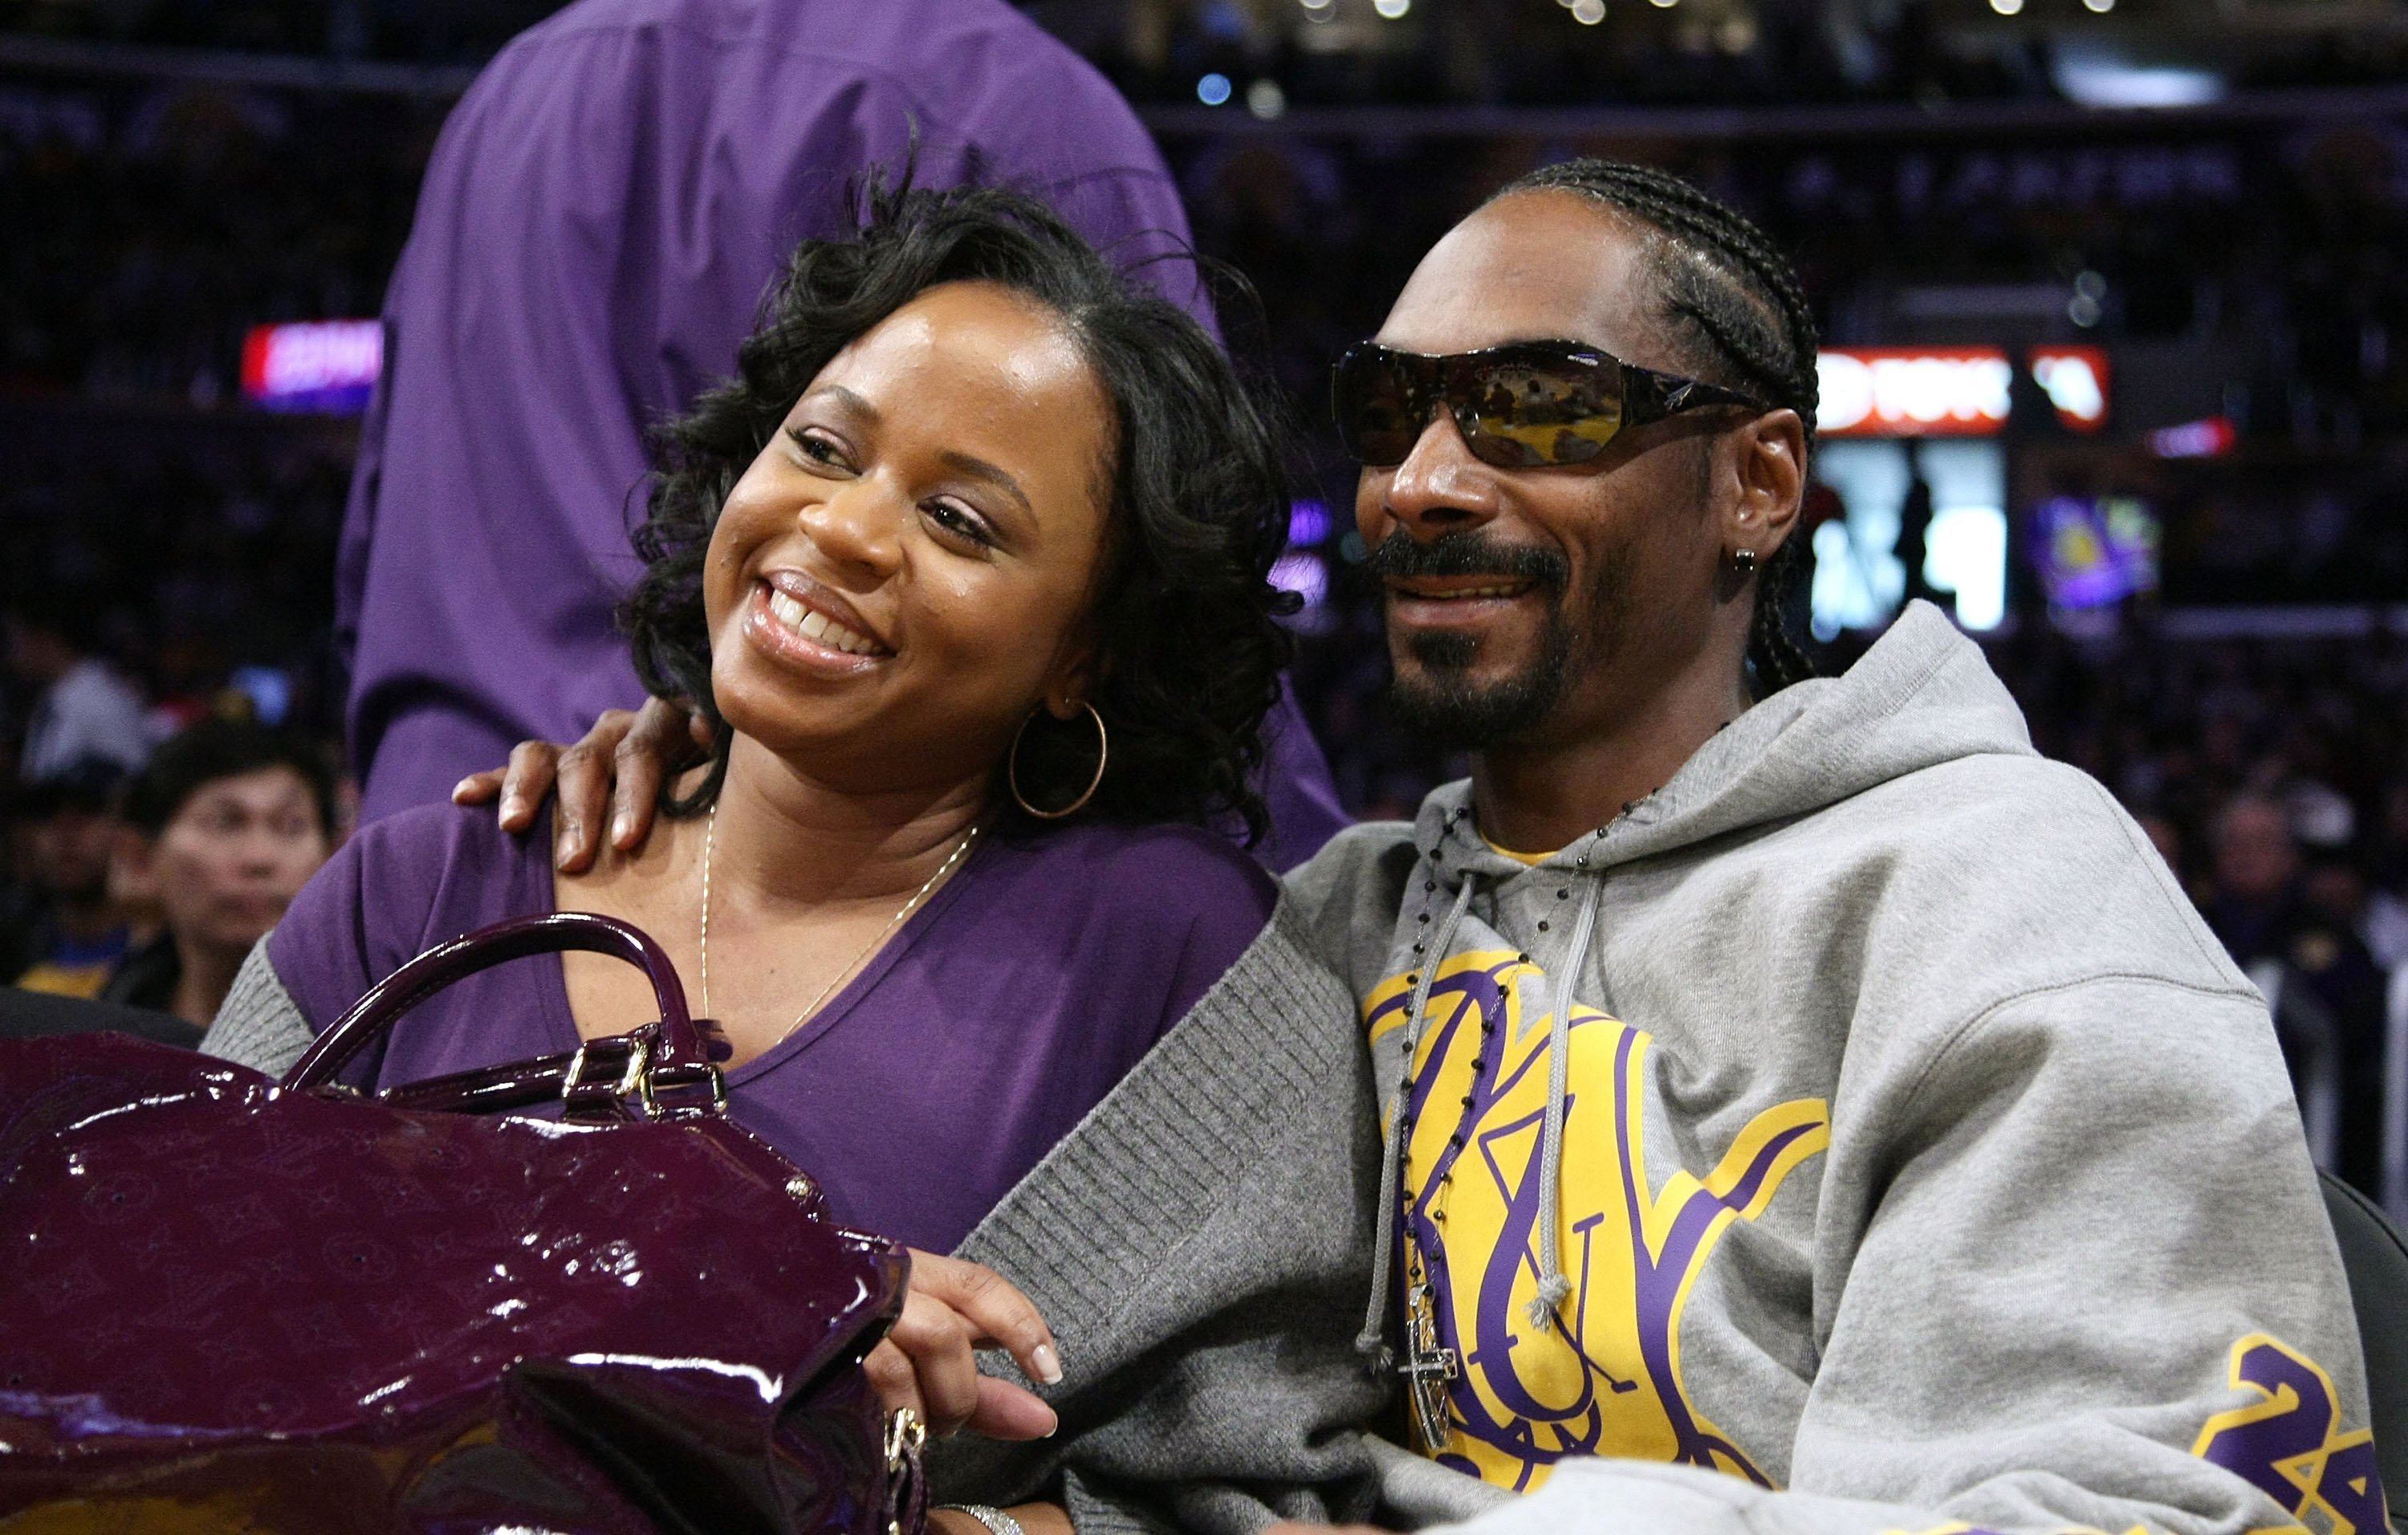 Shante Broadus and Snoop Dogg at the curtsied of a Lakers game in December 2008. | Photo: Getty Images